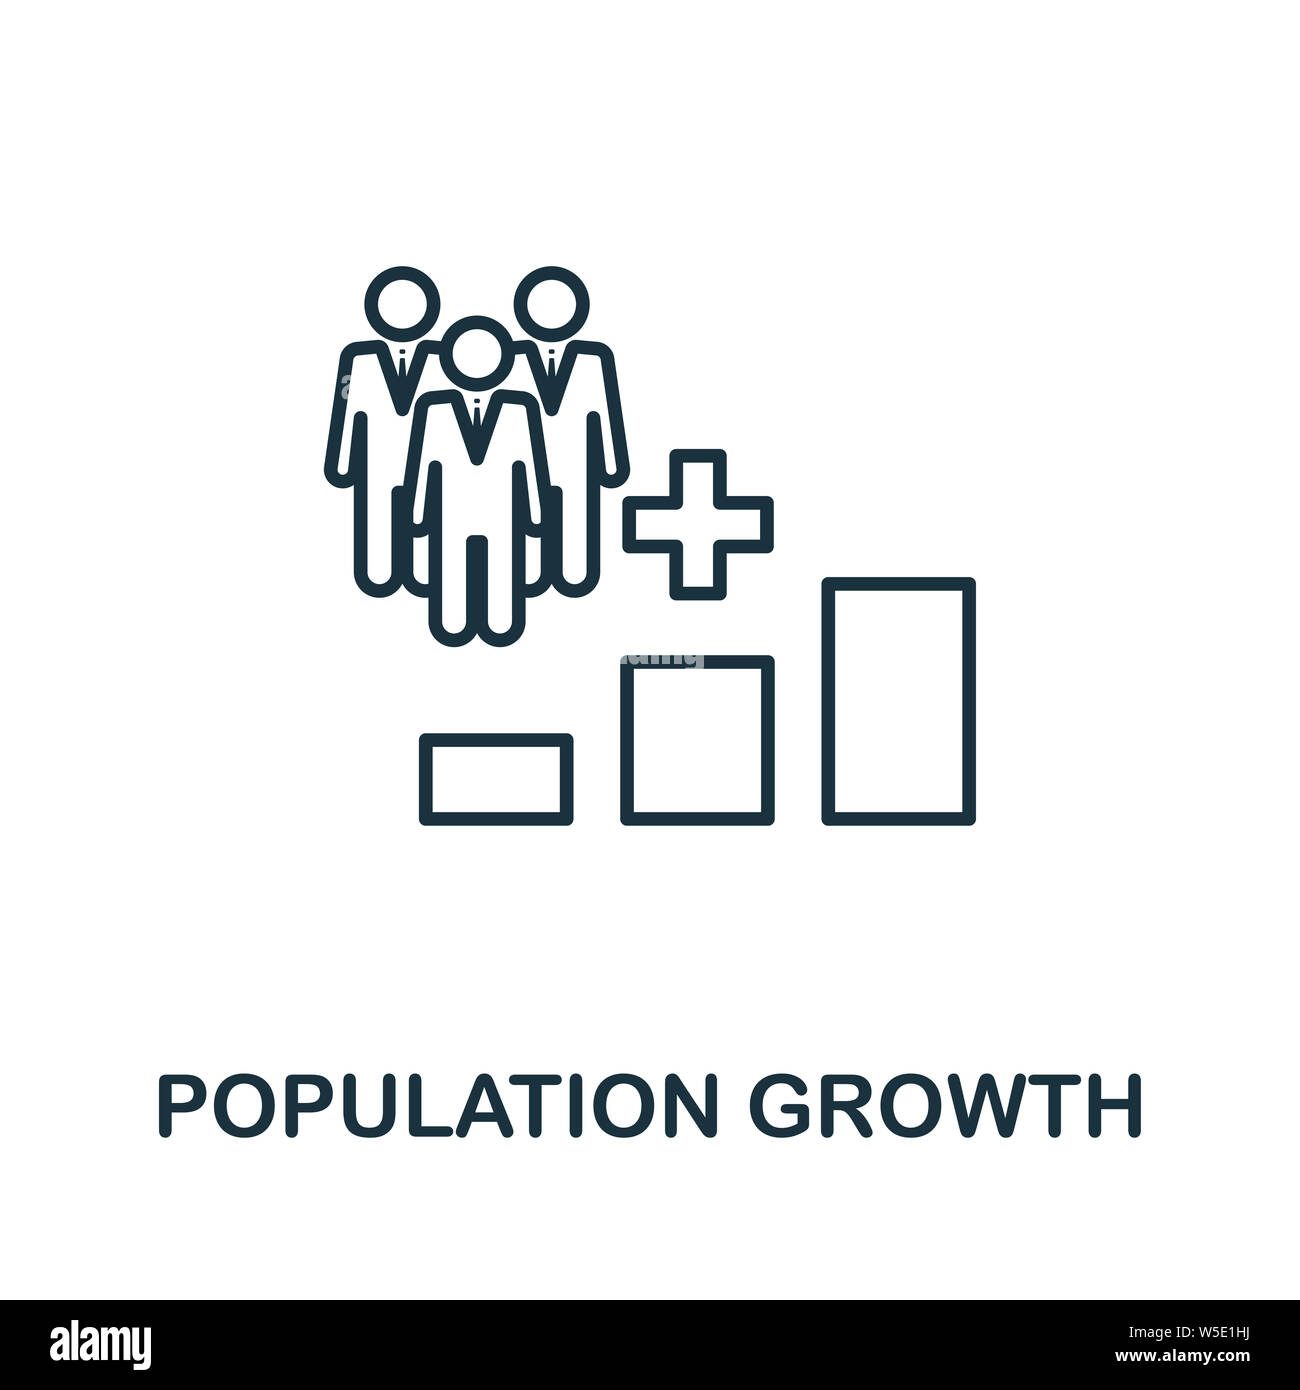 Population Growth outline icon. Thin line style from icons collection. Pixel perfect simple element population growth icon for web design, apps Stock Photo